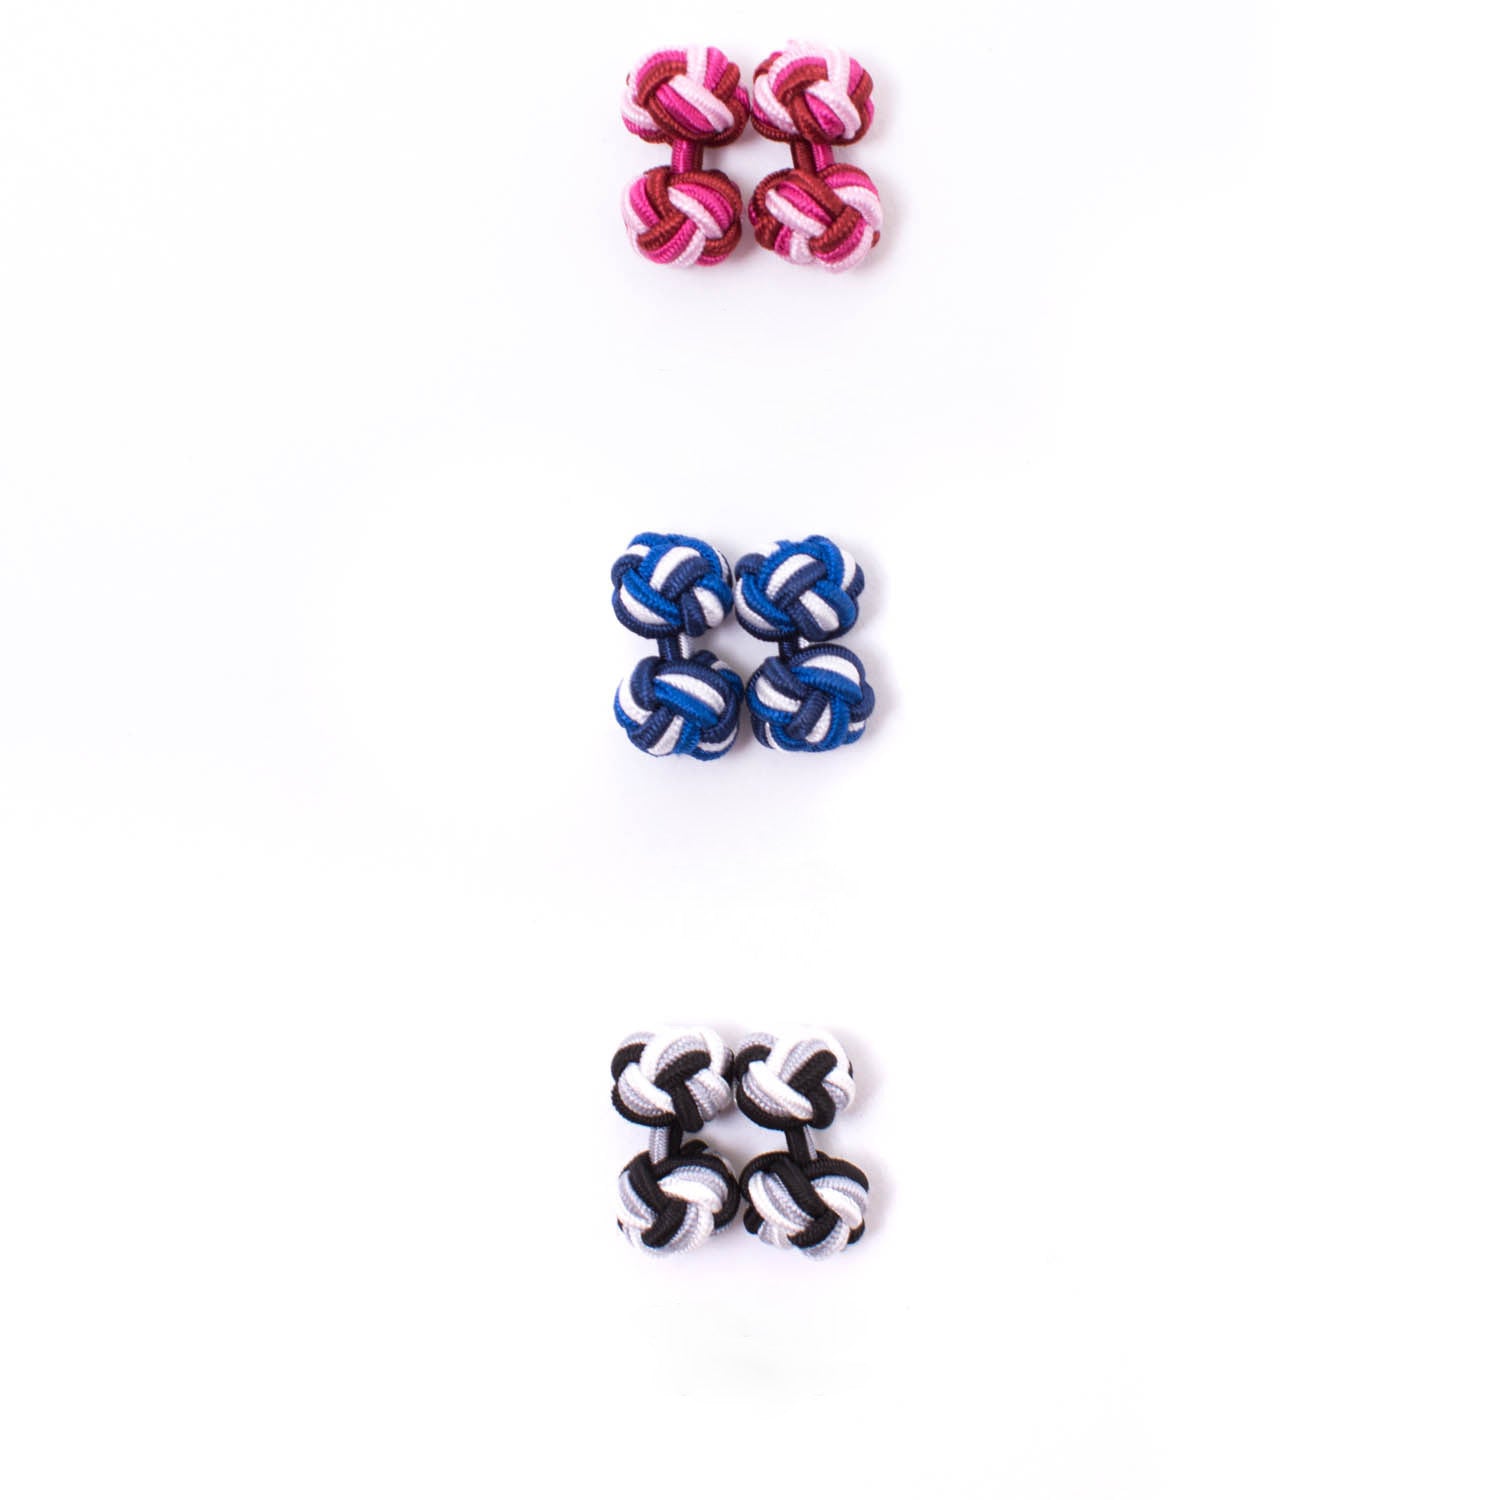 Four Tri-Colored Knot Cufflinks by KirbyAllison.com on a white surface.